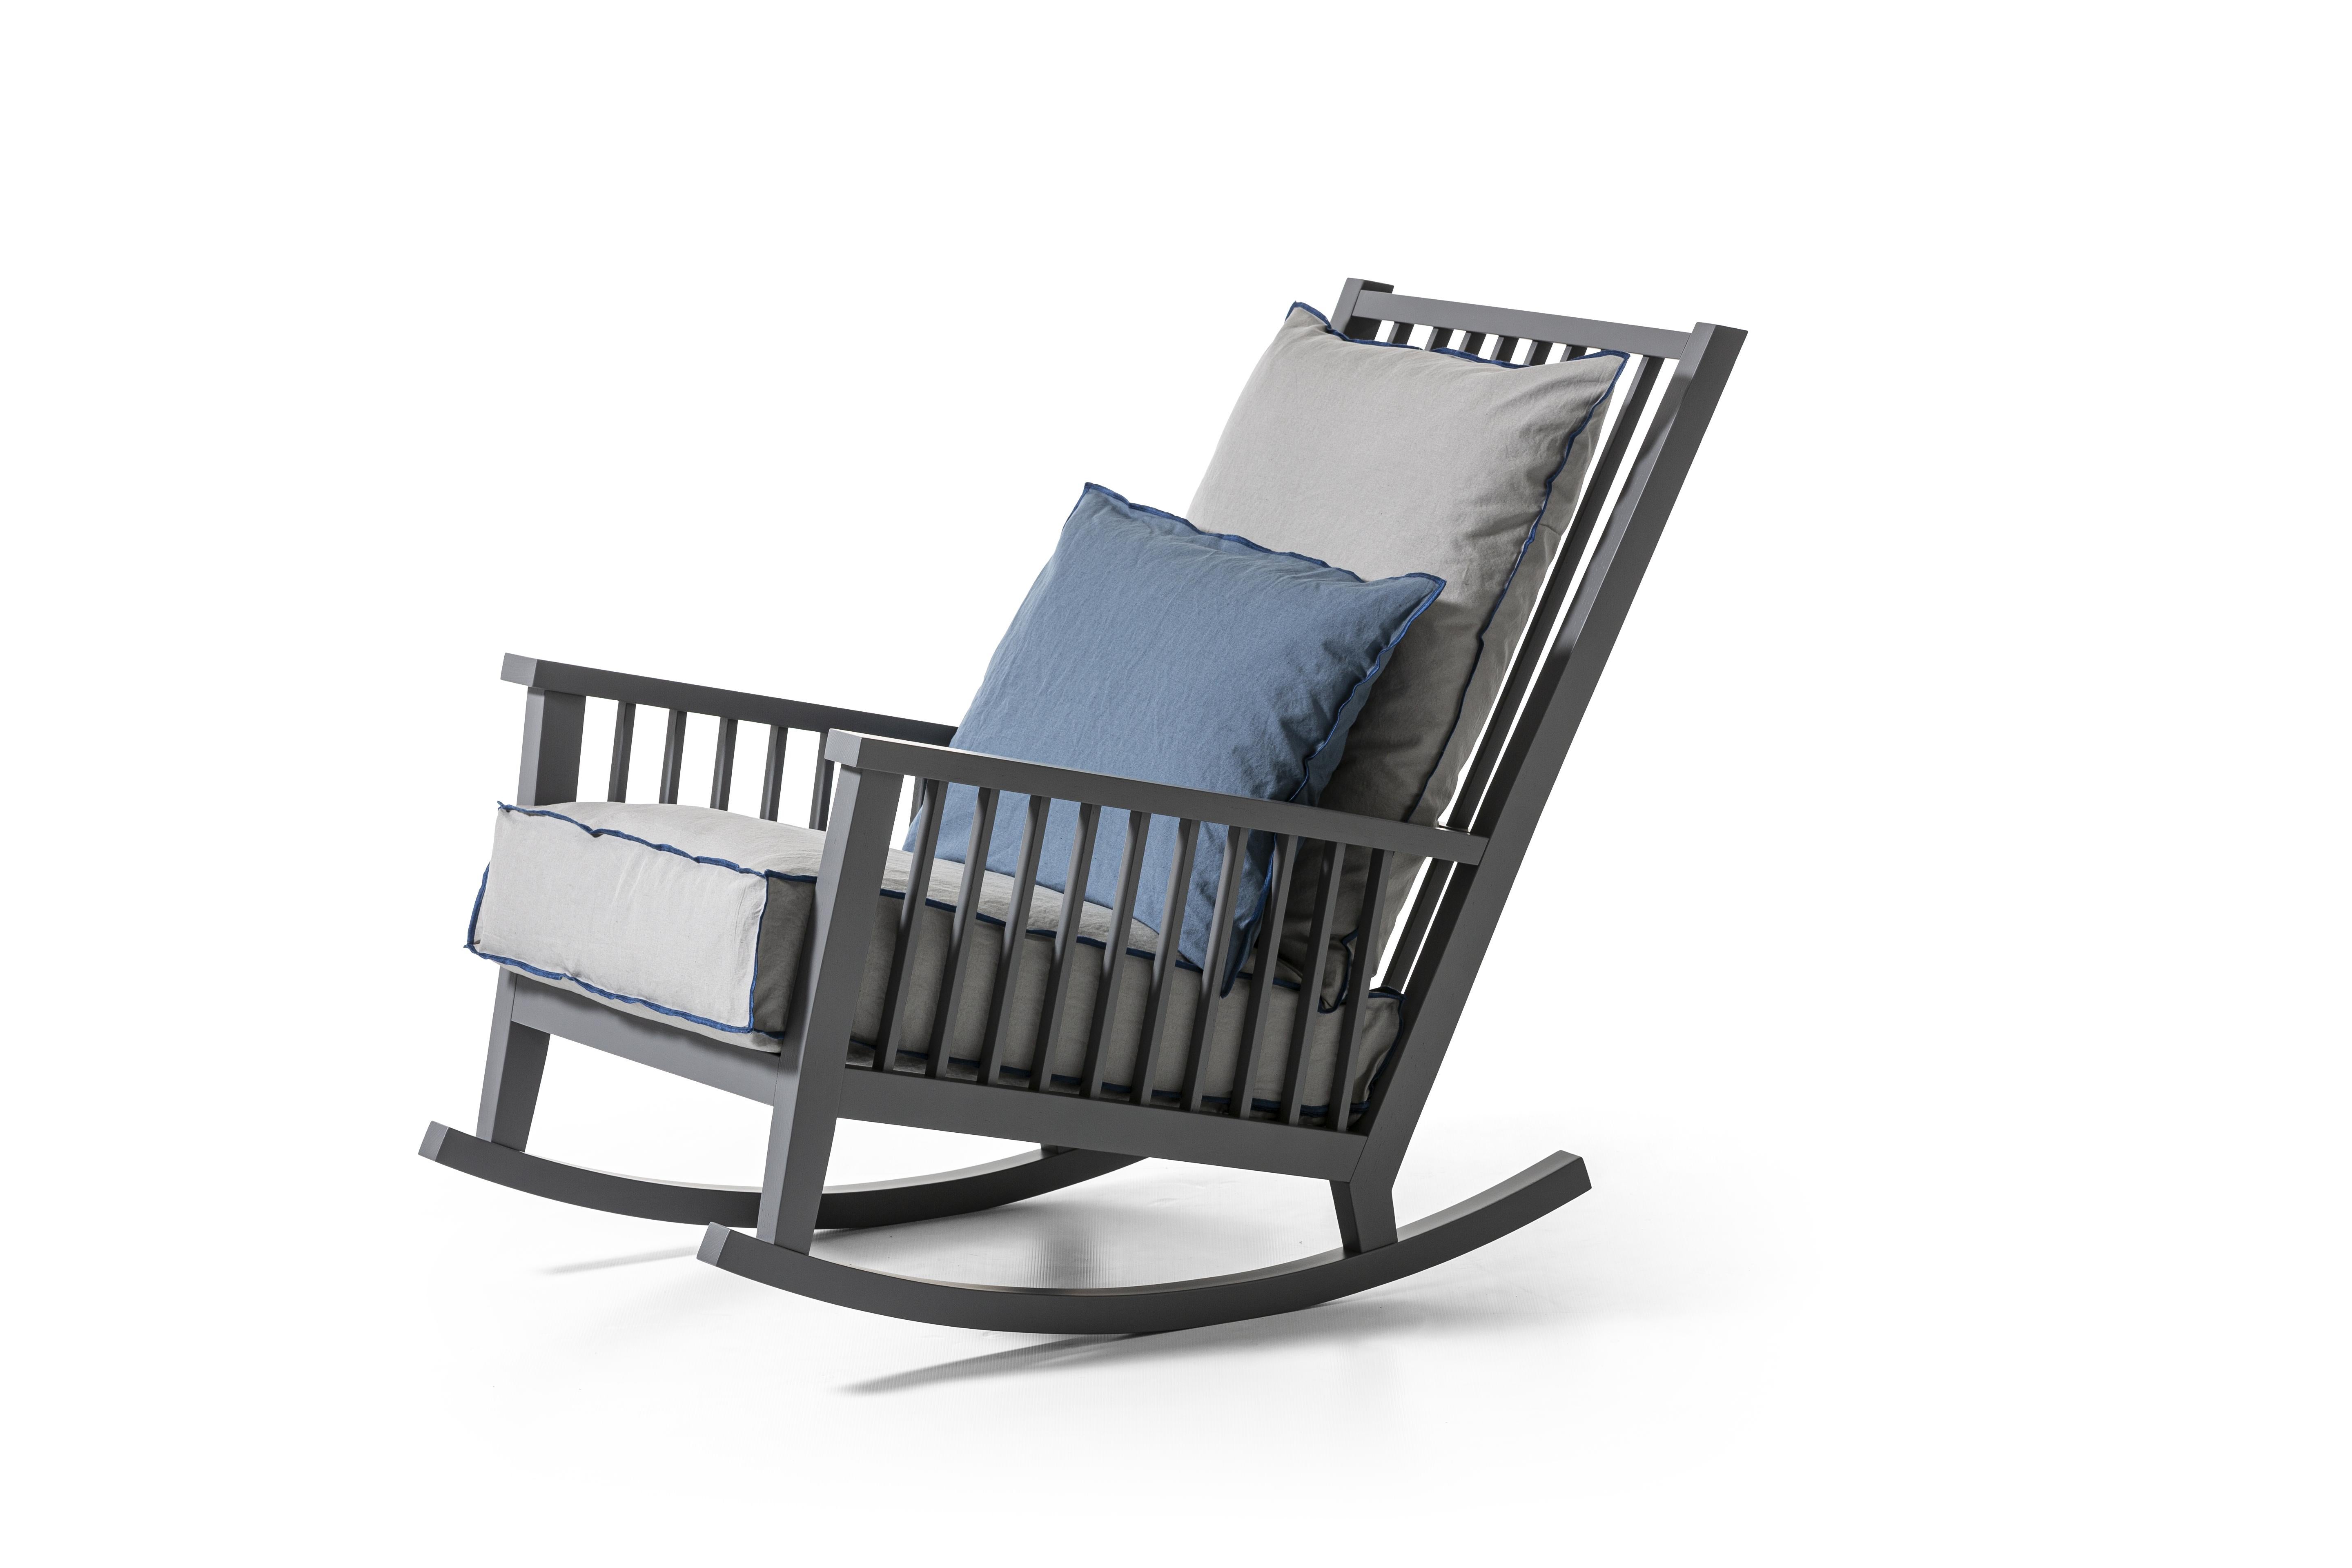 Rocking chair in wood, Gray 09 is characterised by a high backrest with visible slats on which a soft loose cushion rests. The structure, with a large and welcoming seat, is made of natural painted Canaletto walnut, bleached oak or white, grey,